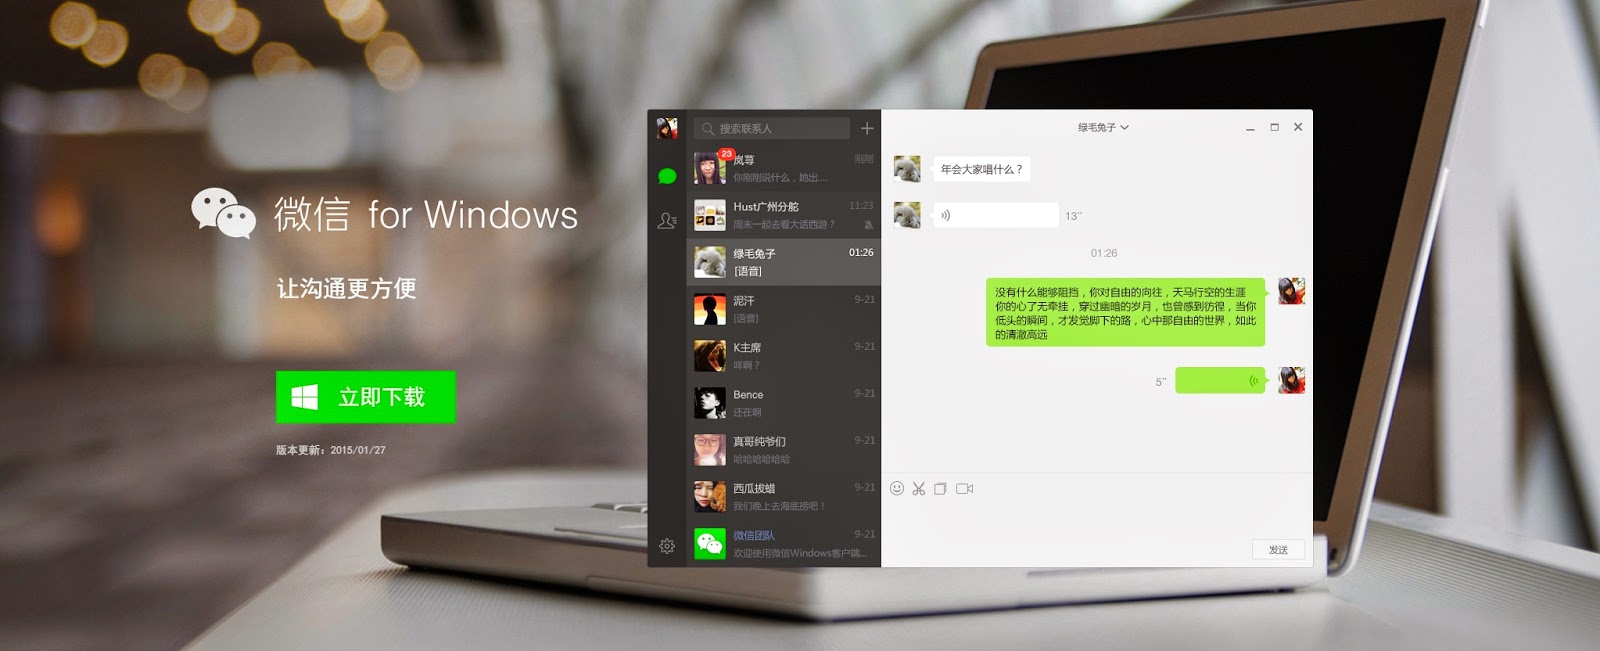 wechat for mac 10.8